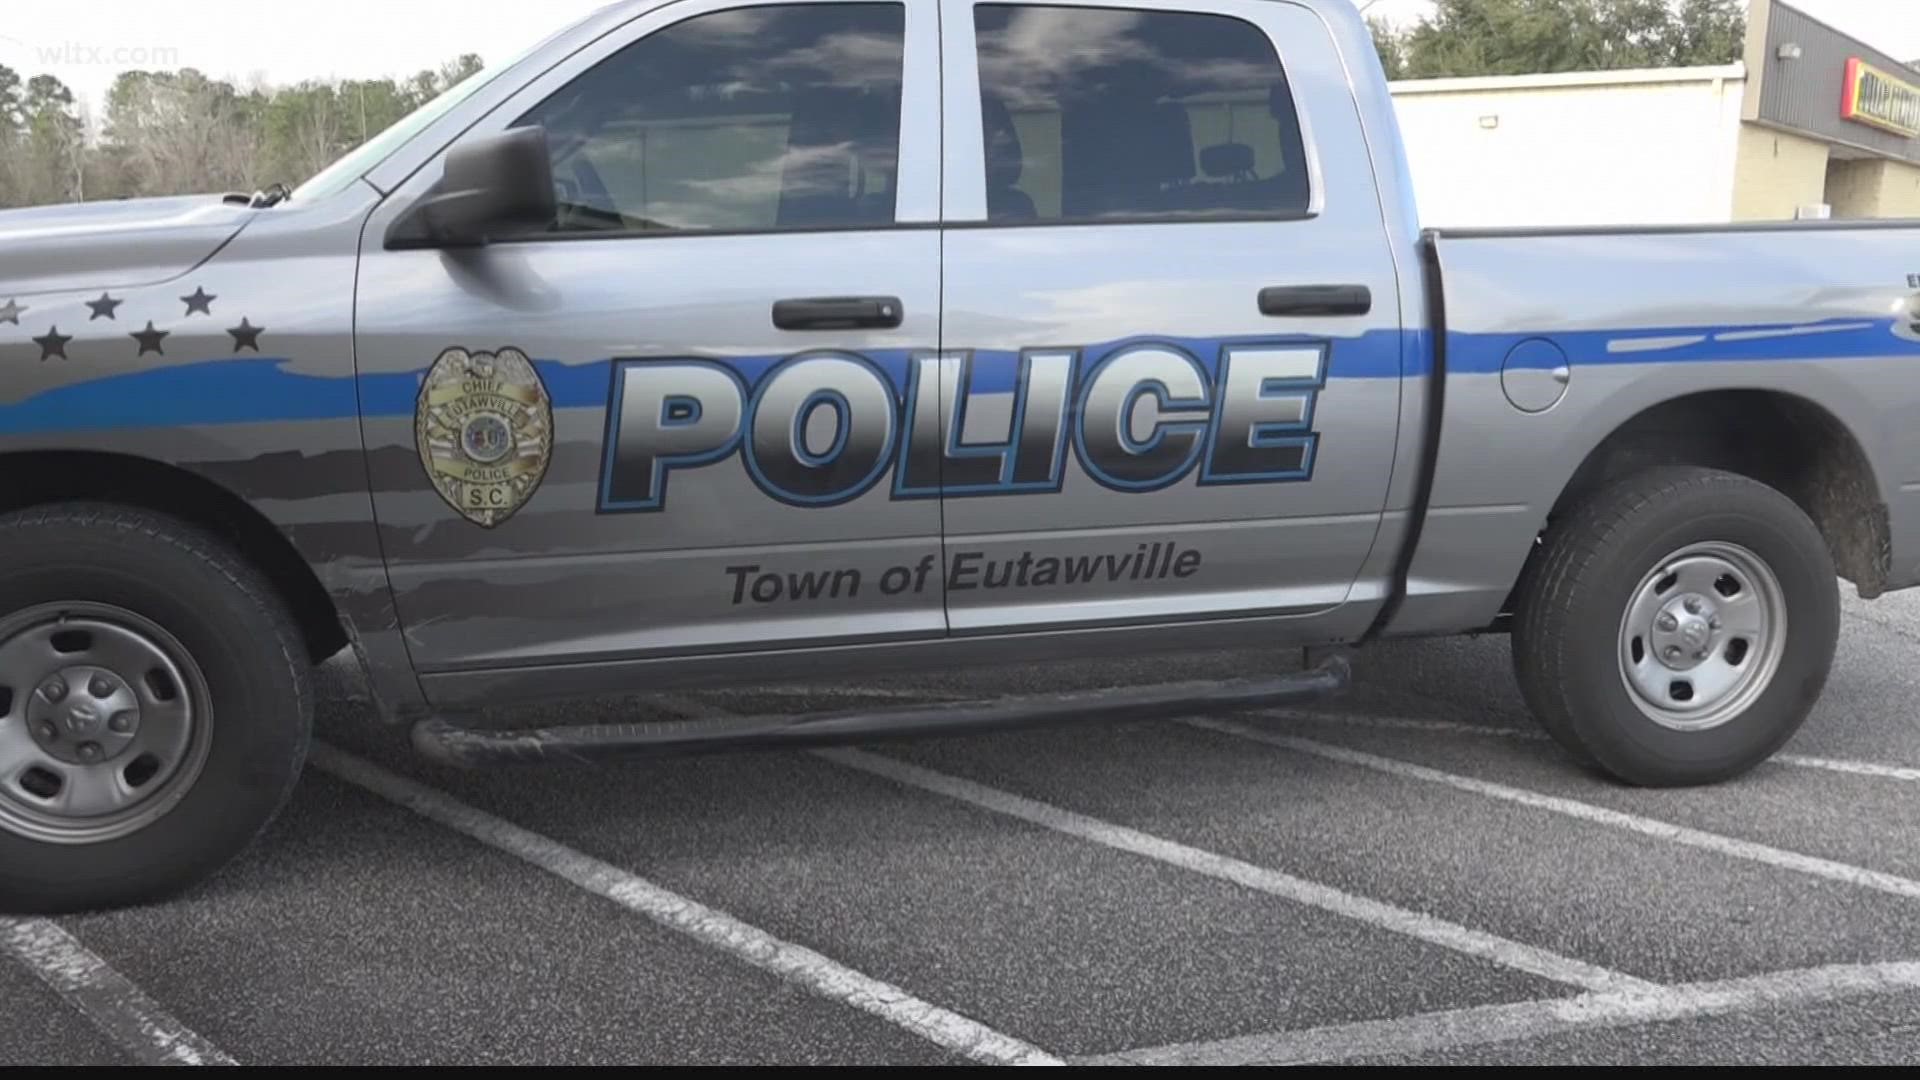 The Eutawville Police Department says it is working to expand into the nearby Town of Vance, which does not have its own police force.